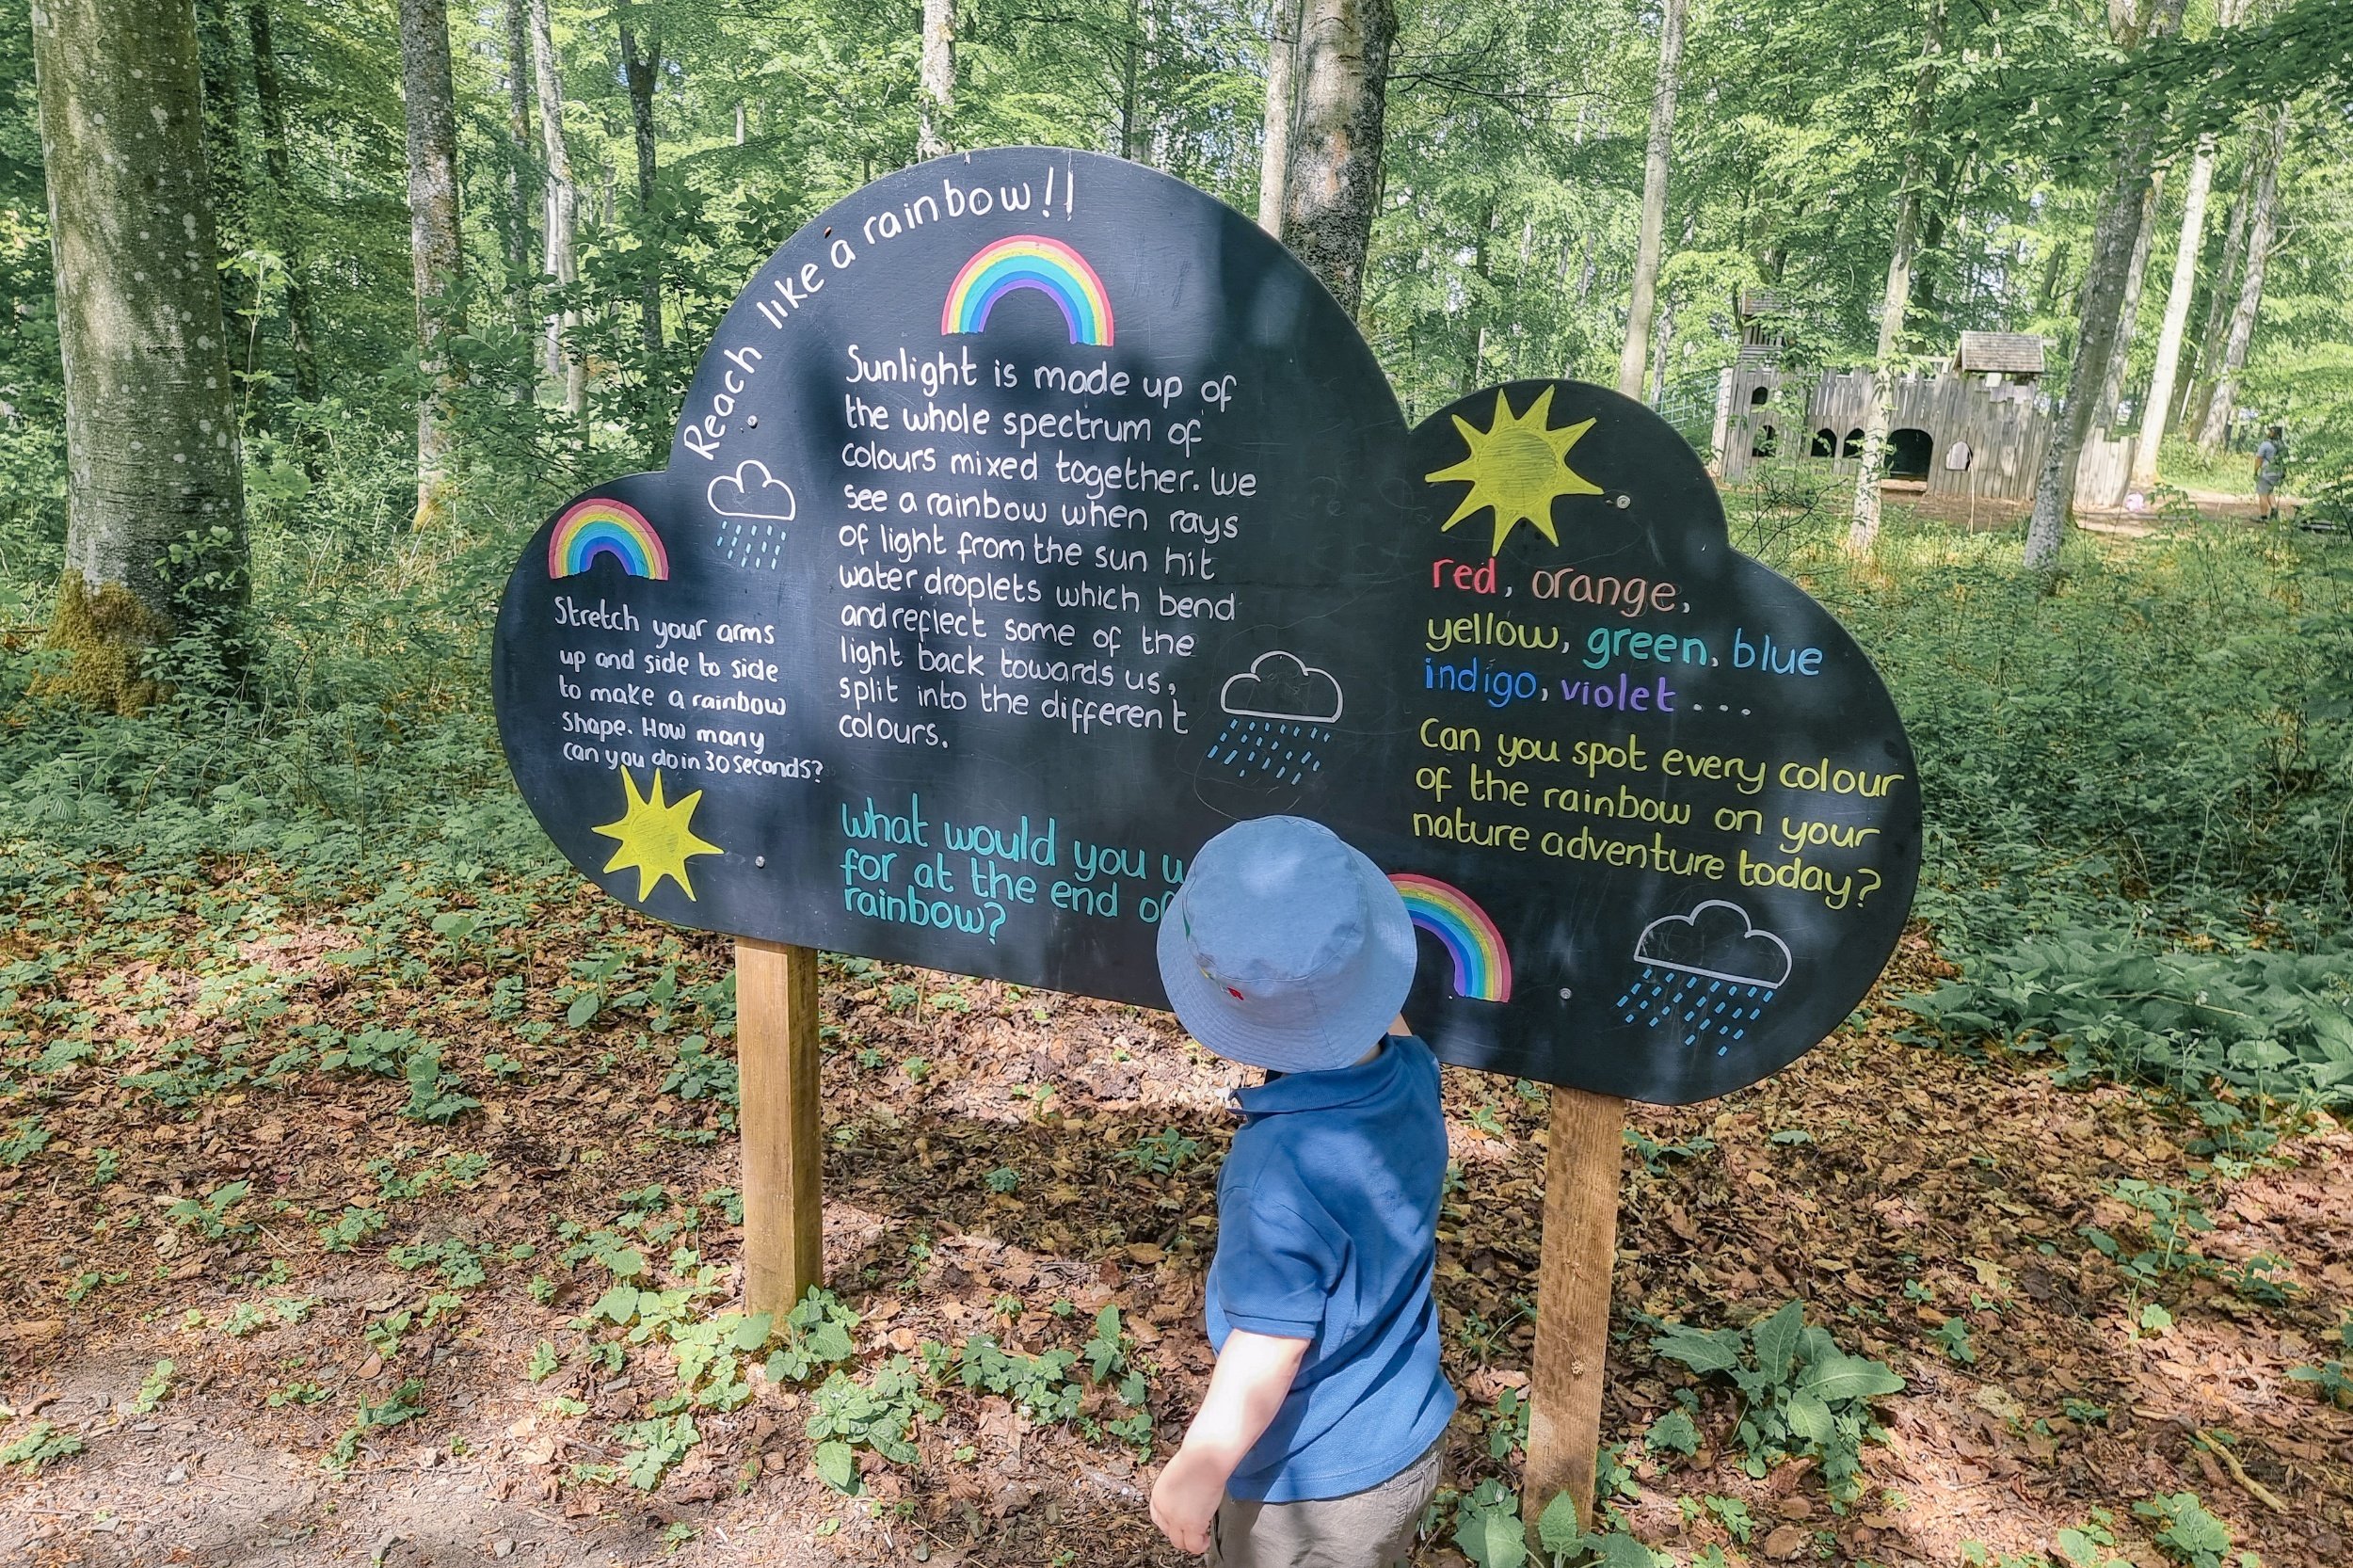 Munchkin is stood in green shorts, a blue polo shirt and blue bucket hat. He is facing a blackboard with writing on it in the Wallington woodland.